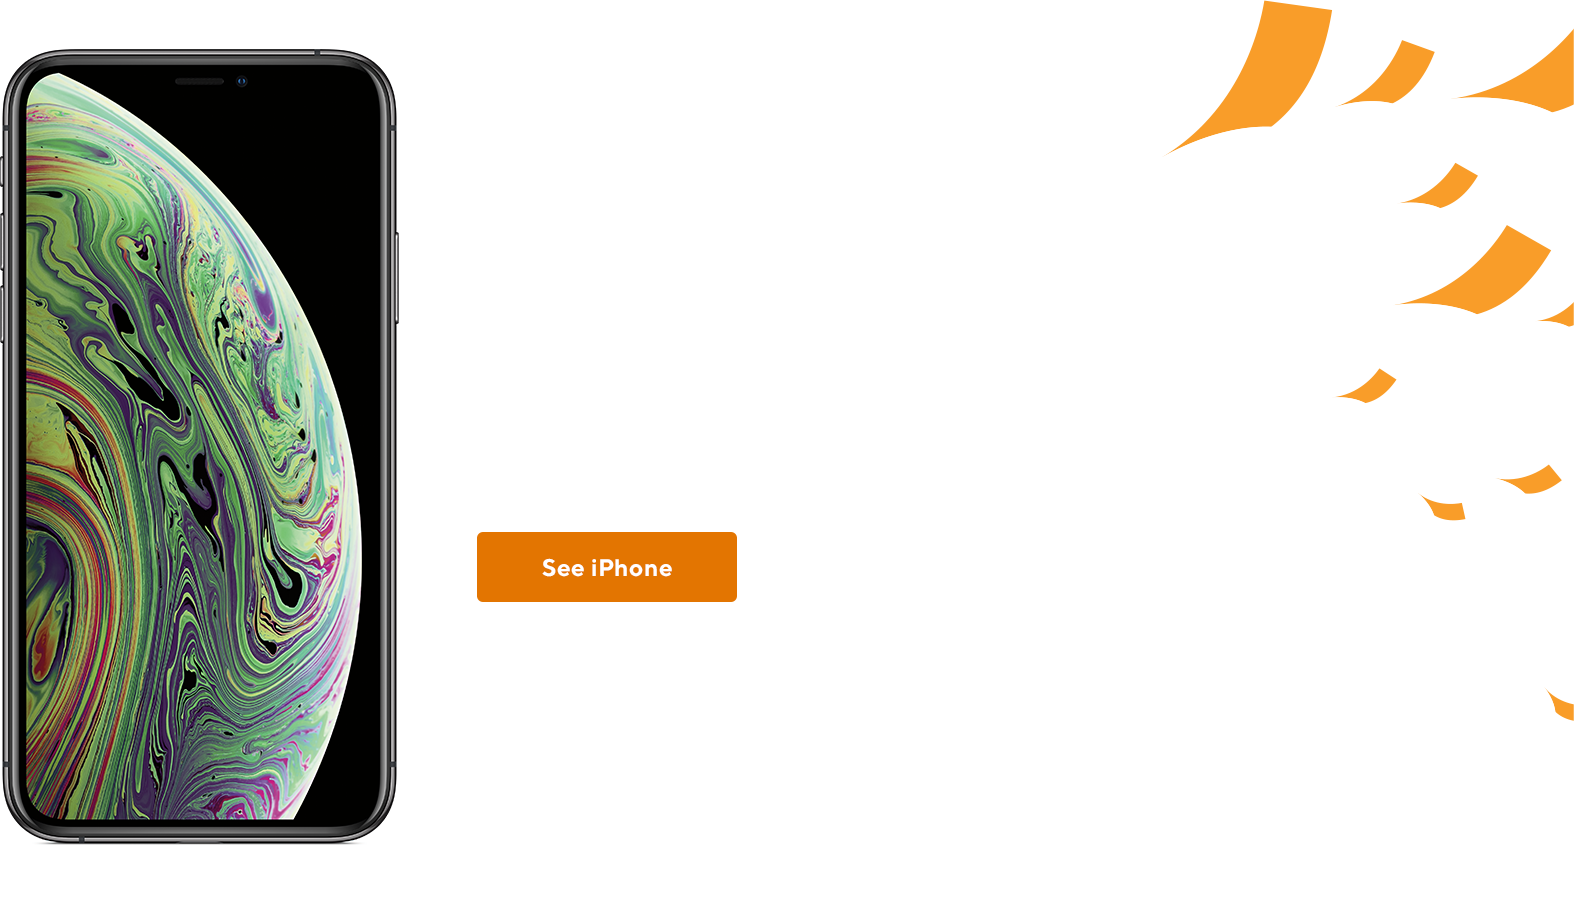 iPhone. Get the iPhone you've always wanted. Choose from the latest iPhones or other classic designs - find the one that fits your lifestyle.